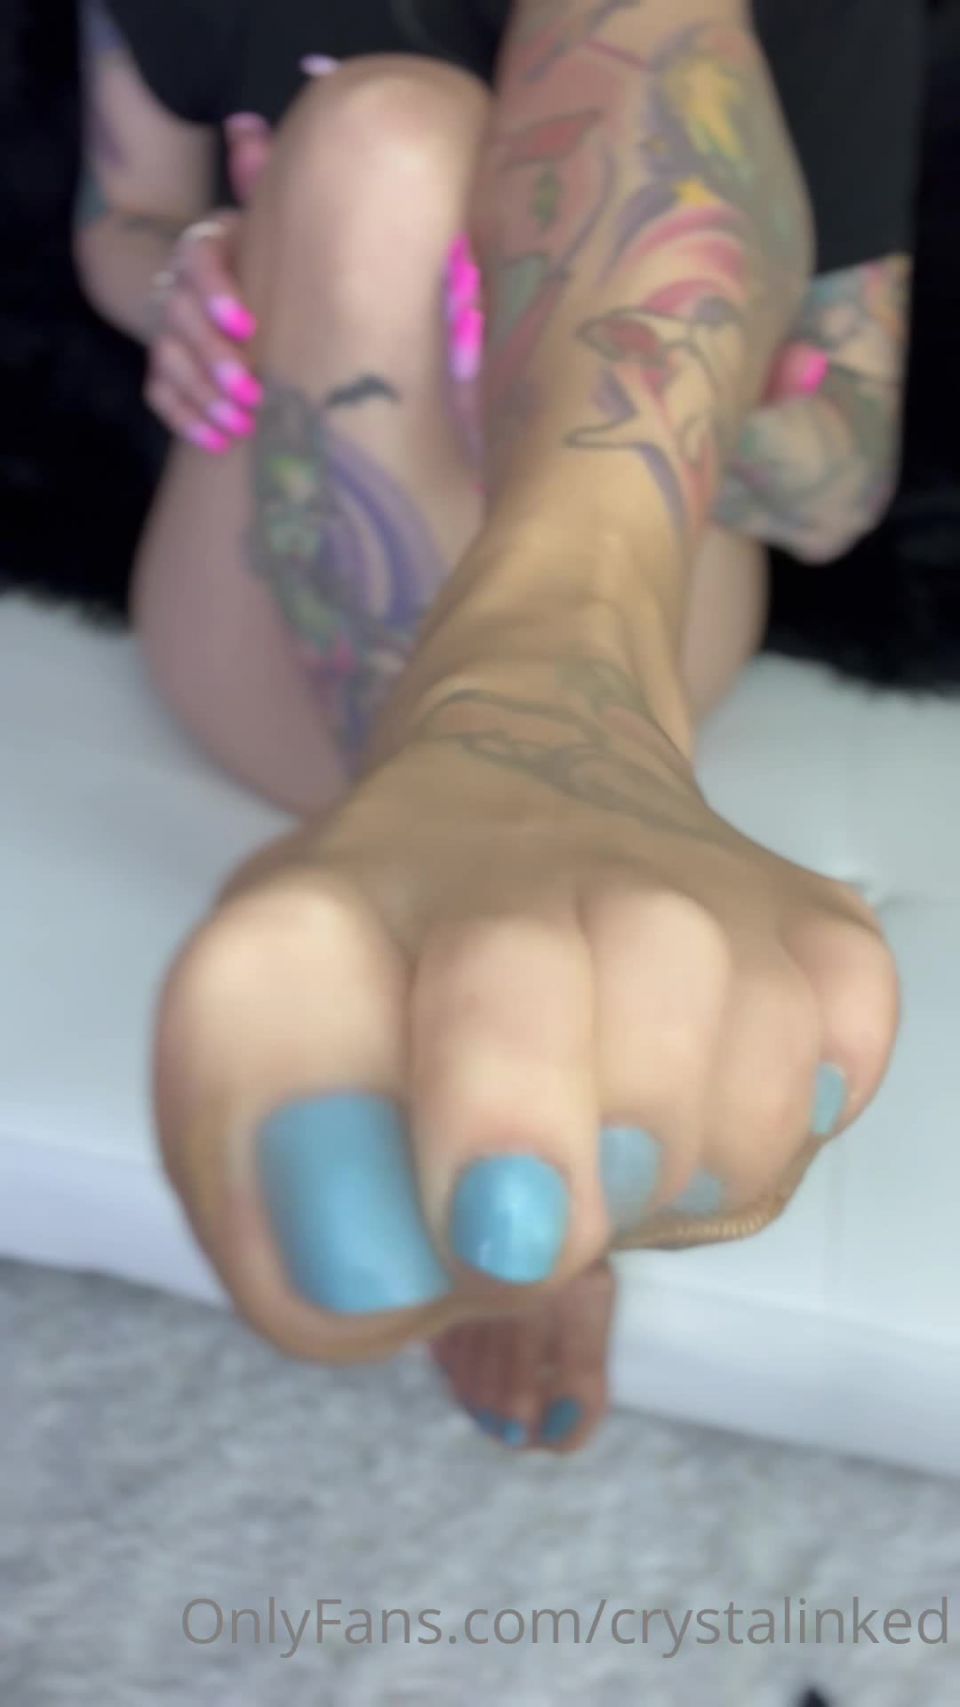 Crystal Inked () Crystalinked - hardly working from home while my new pedi and nylons distract me 29-03-2022